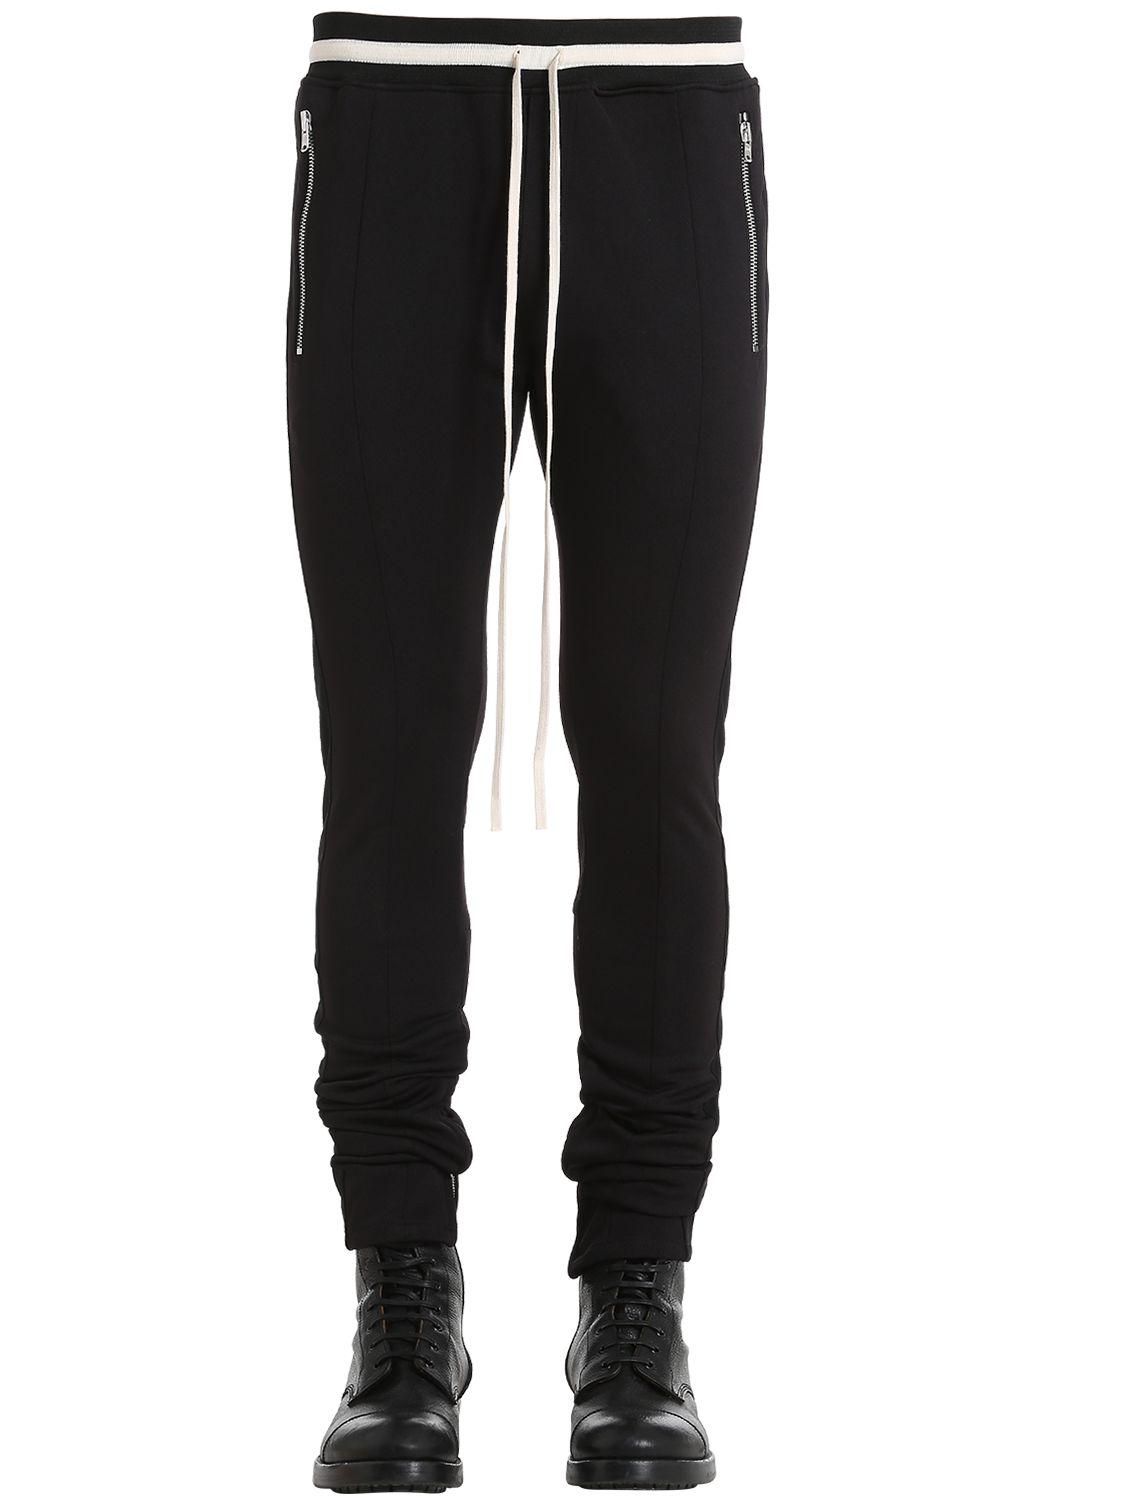 Fear Of God Techno Track Pants W/ Side Bands in Black for Men - Lyst